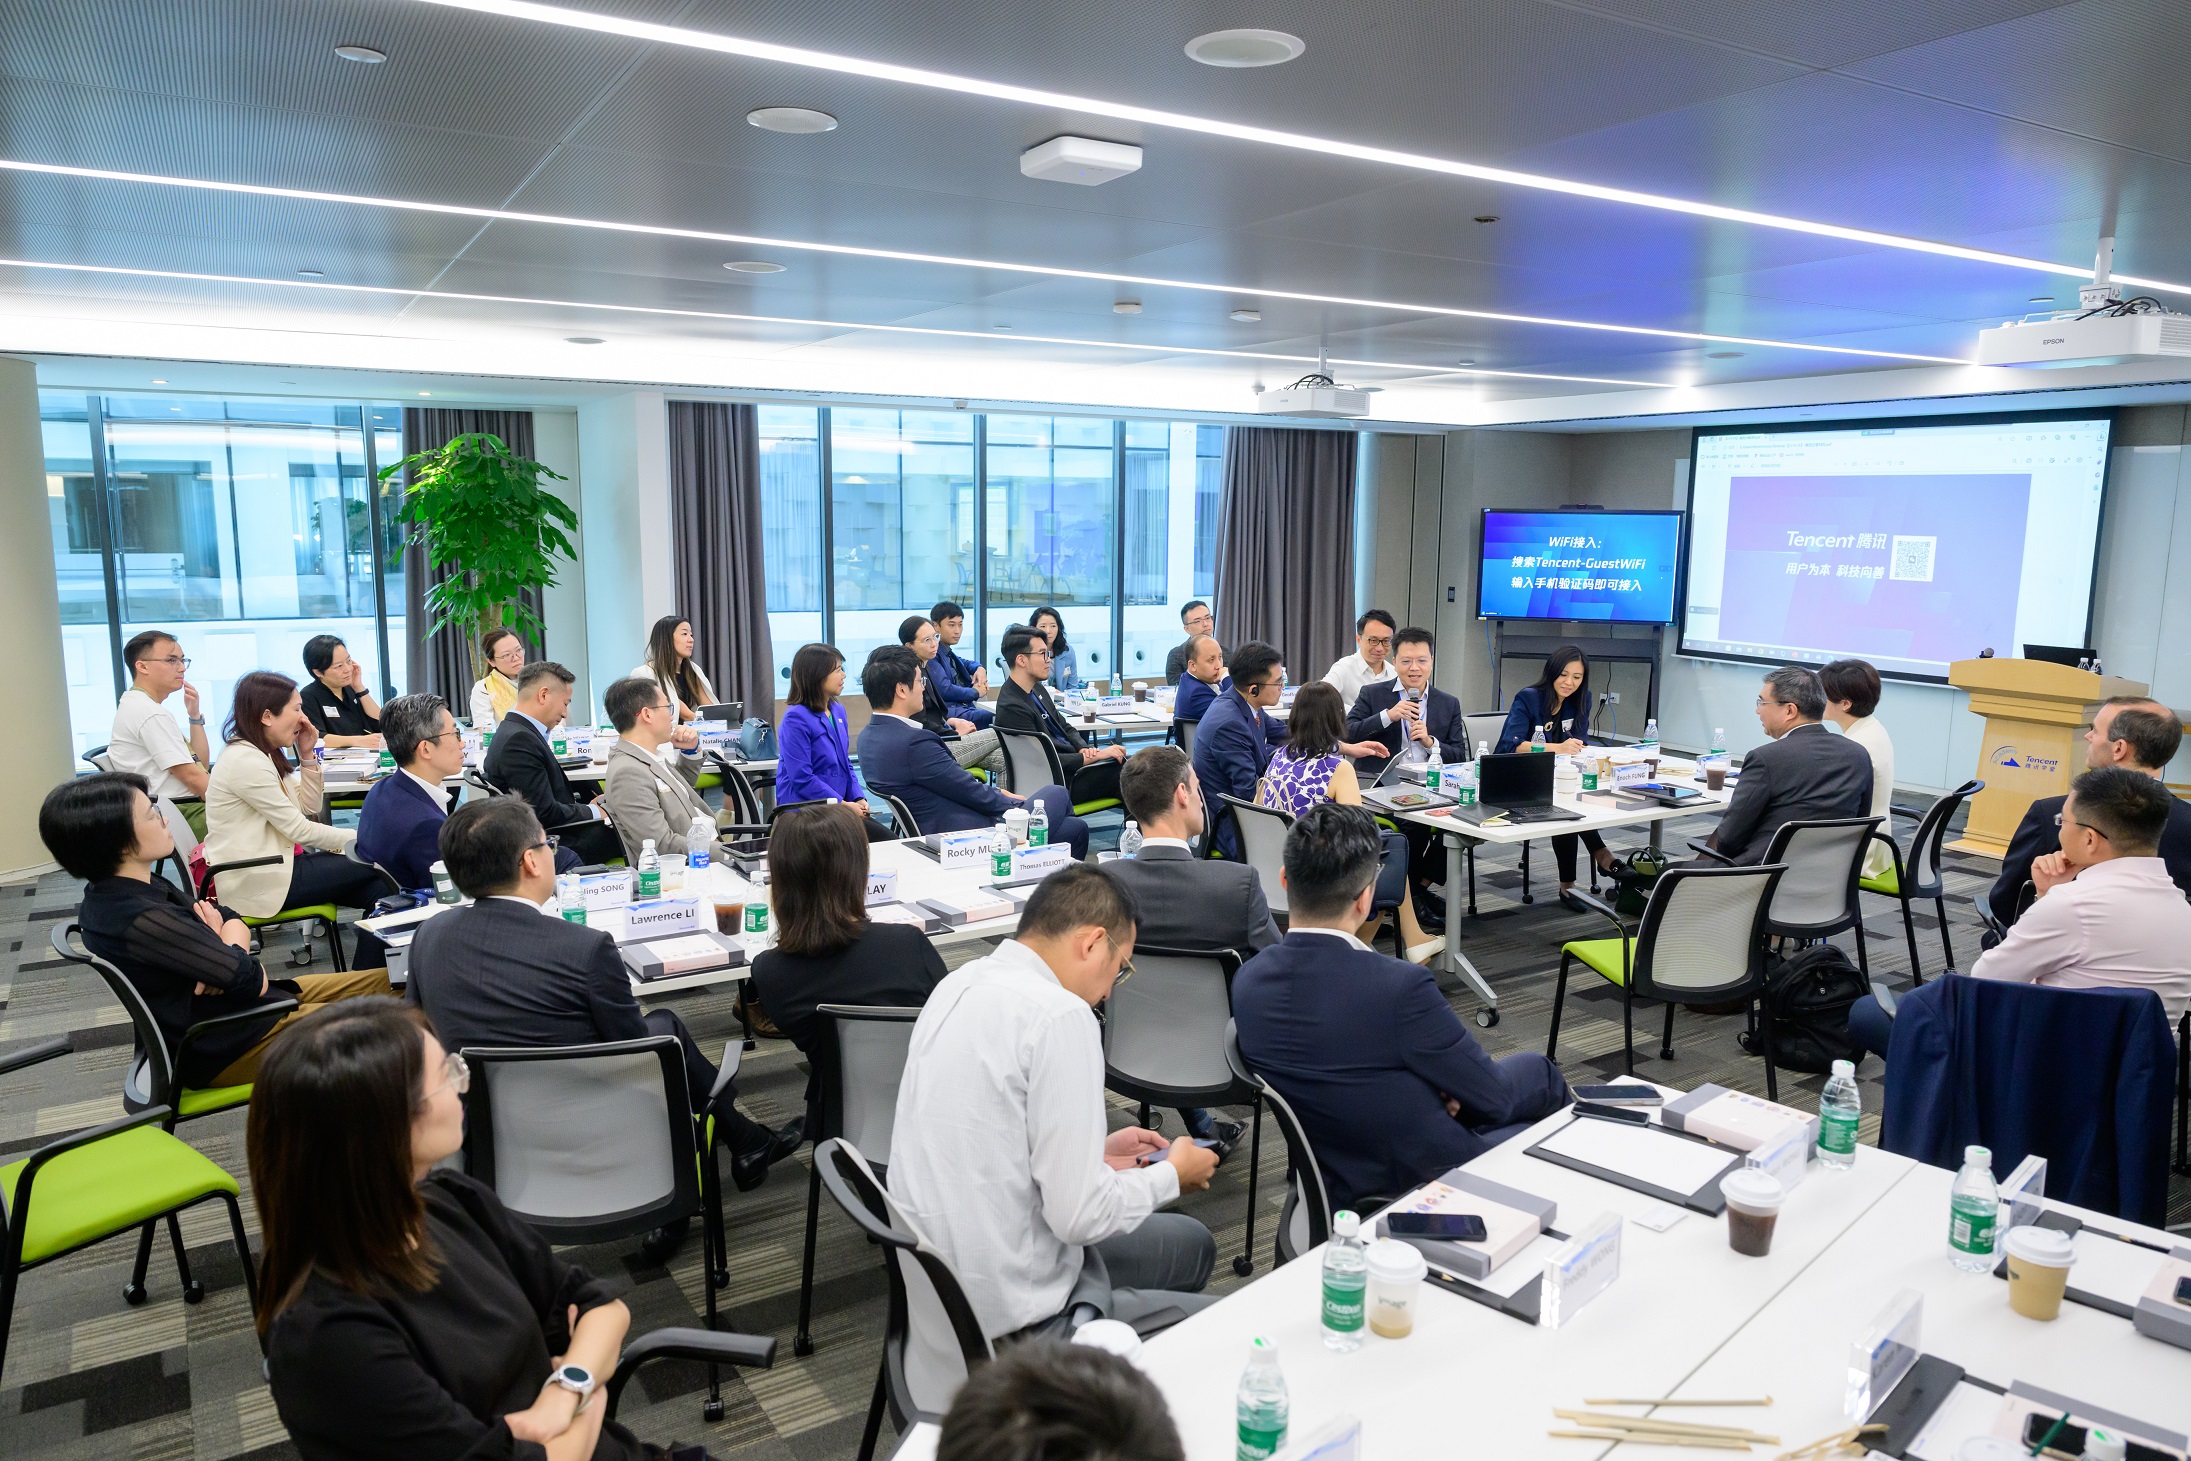 The Financial Leaders Programme cohorts have face-to-face dialogues with senior executives from leading Fintech firms.